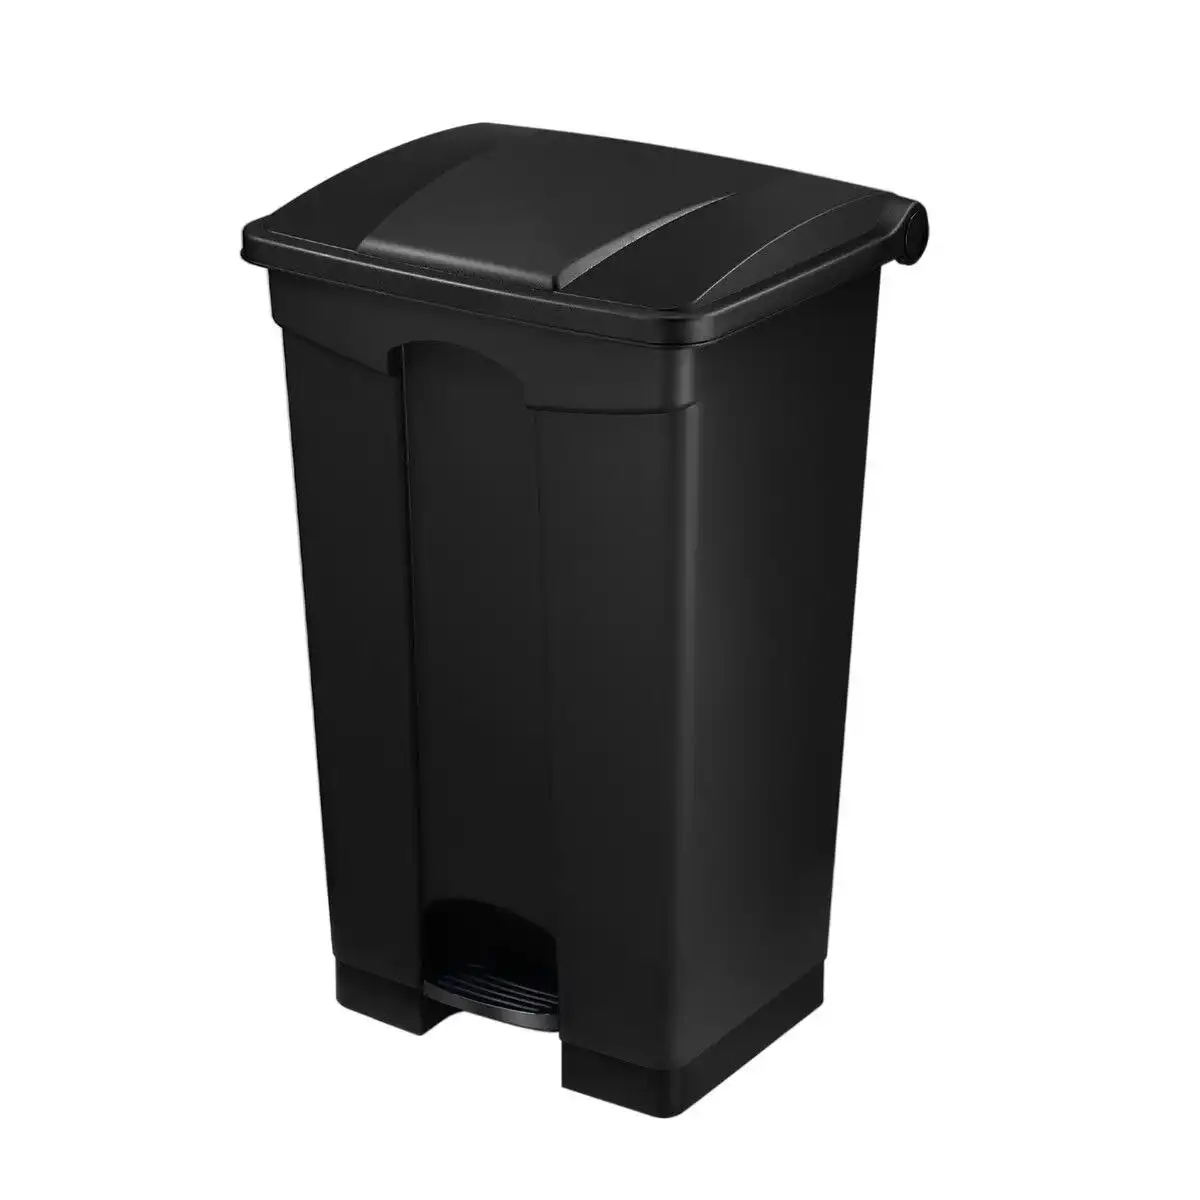 LUXSUITE 68L Rubbish Bin Kitchen Compost Dustbin Garbage Trash Waste Recycling Can Pedal Garden Home Office Large Plastic Black